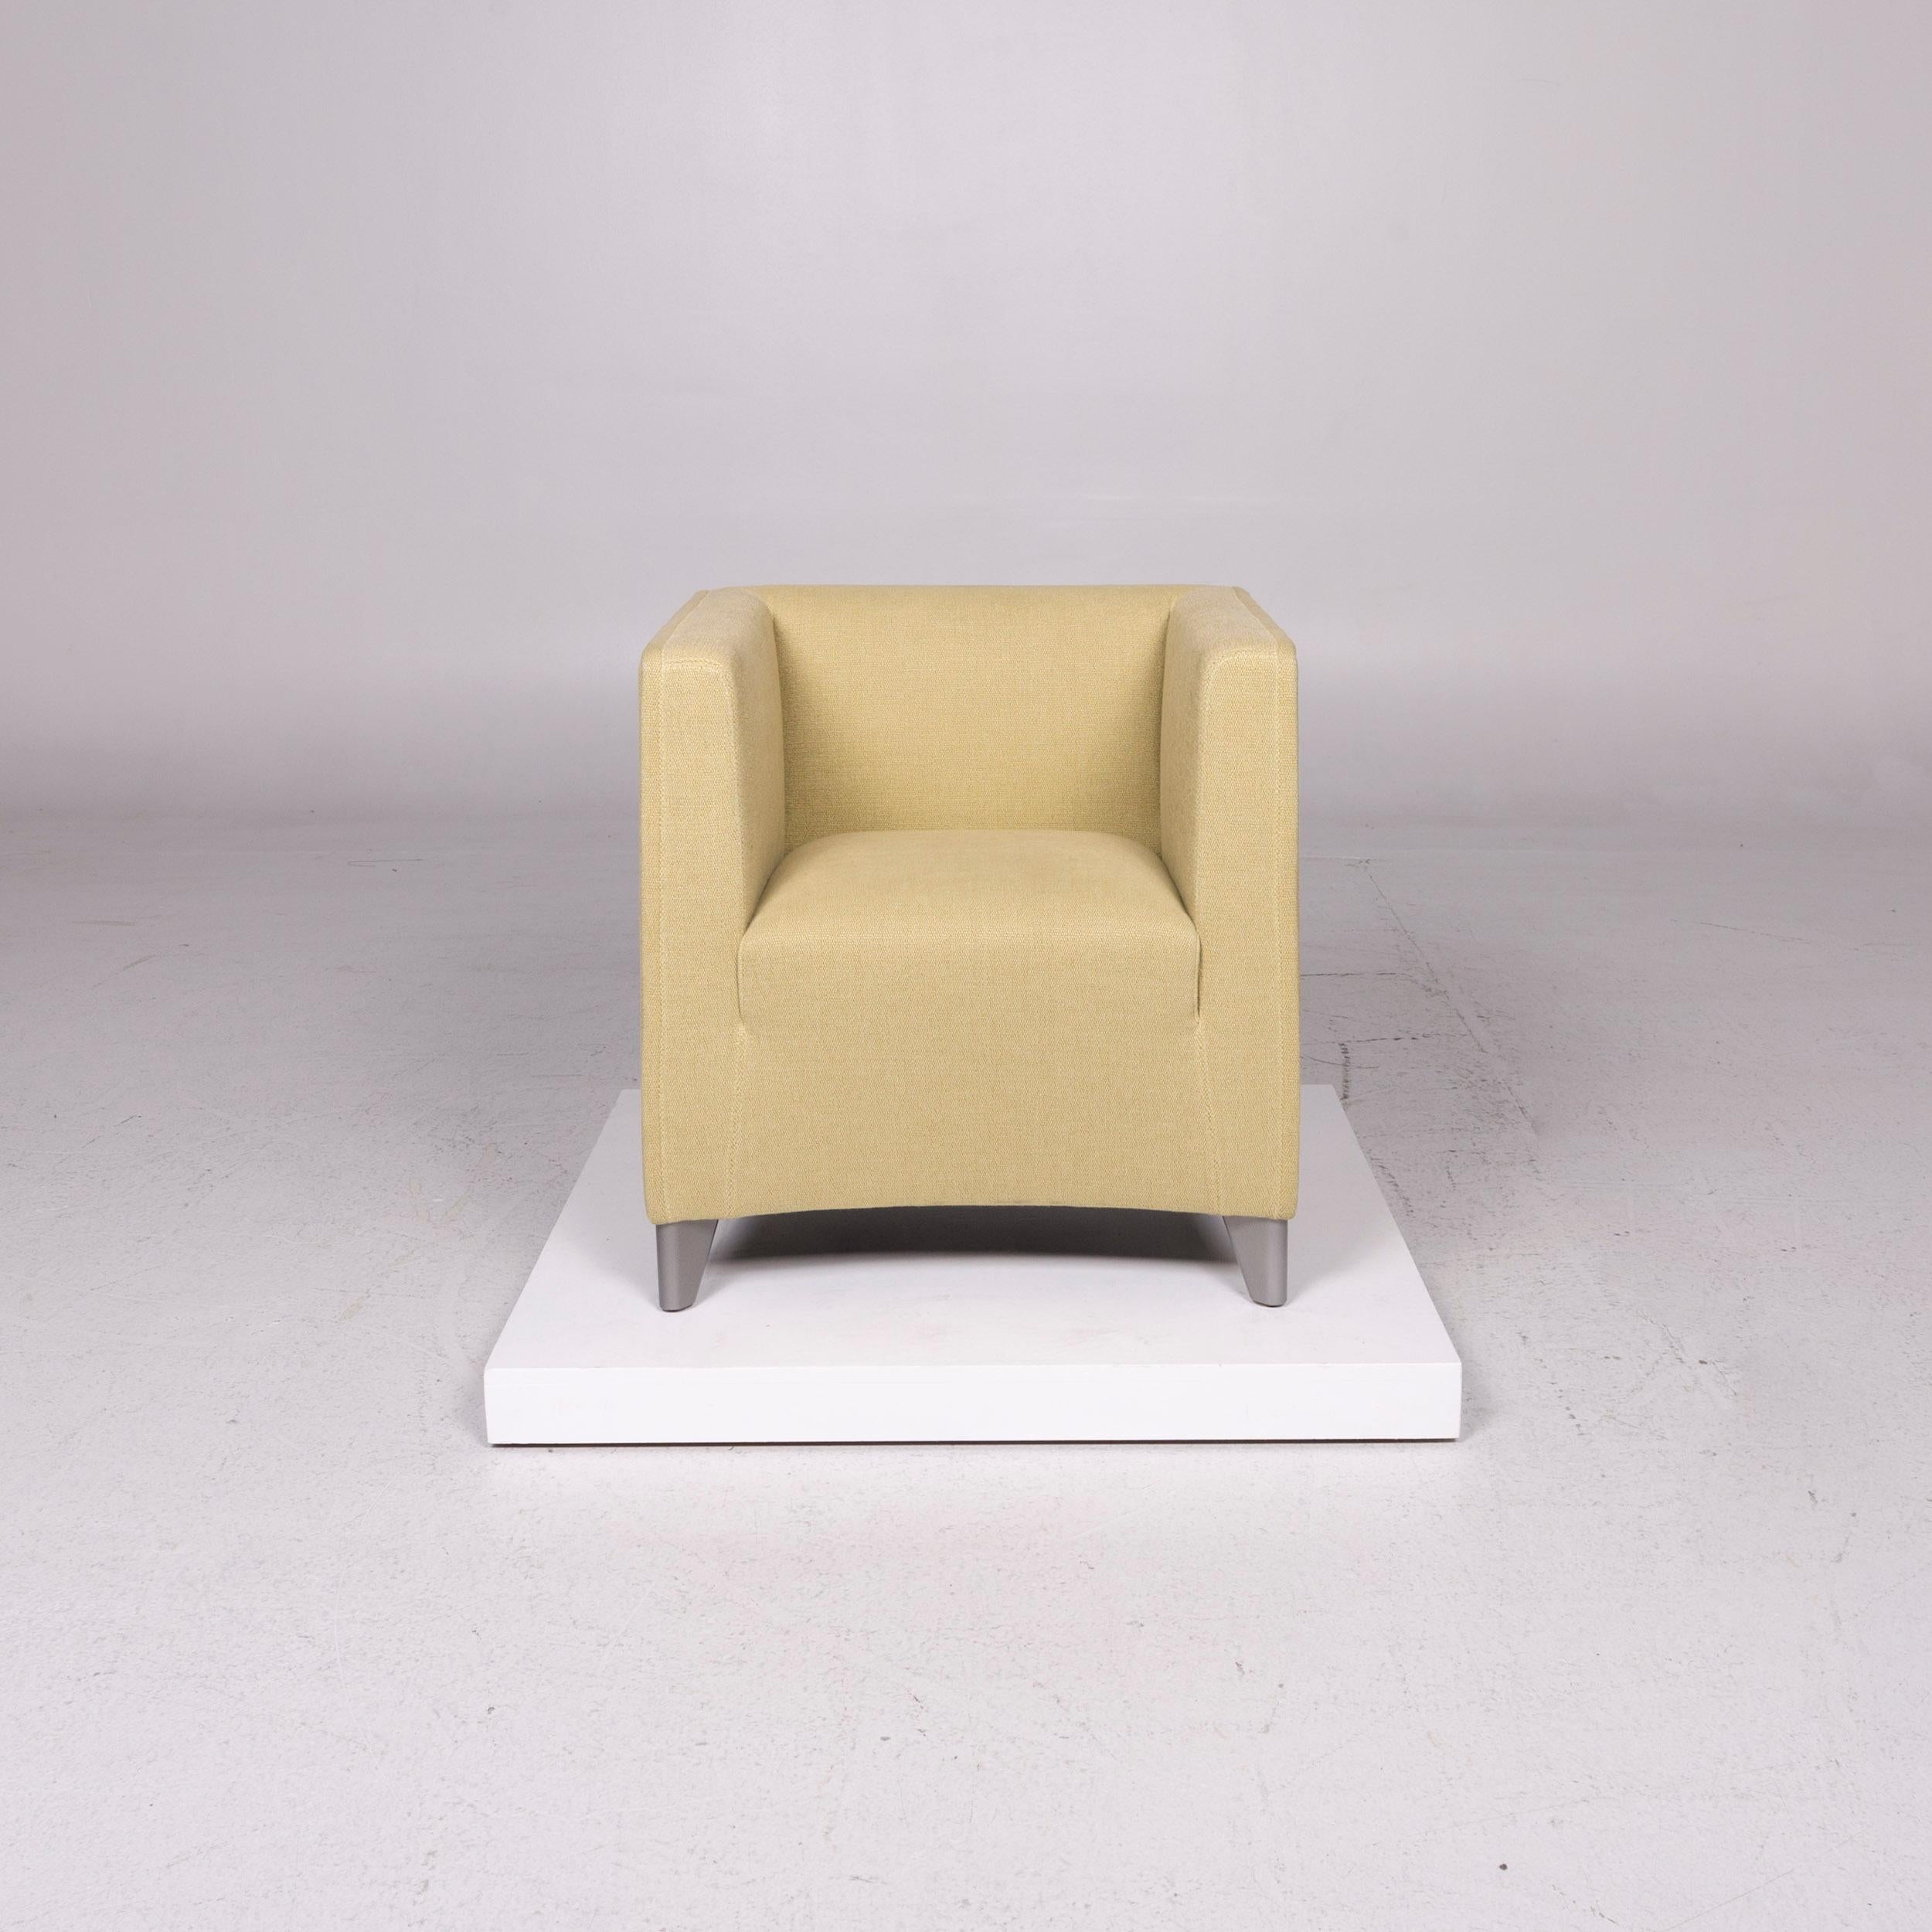 We bring to you a Wittmann Quadra fabric armchair yellow lemon yellow.


 Product measurements in centimeters:
 

Depth 68
Width 69
Height 72
Seat-height 46
Rest-height 72
Seat-depth 50
Seat-width 46
Back-height 26.
 